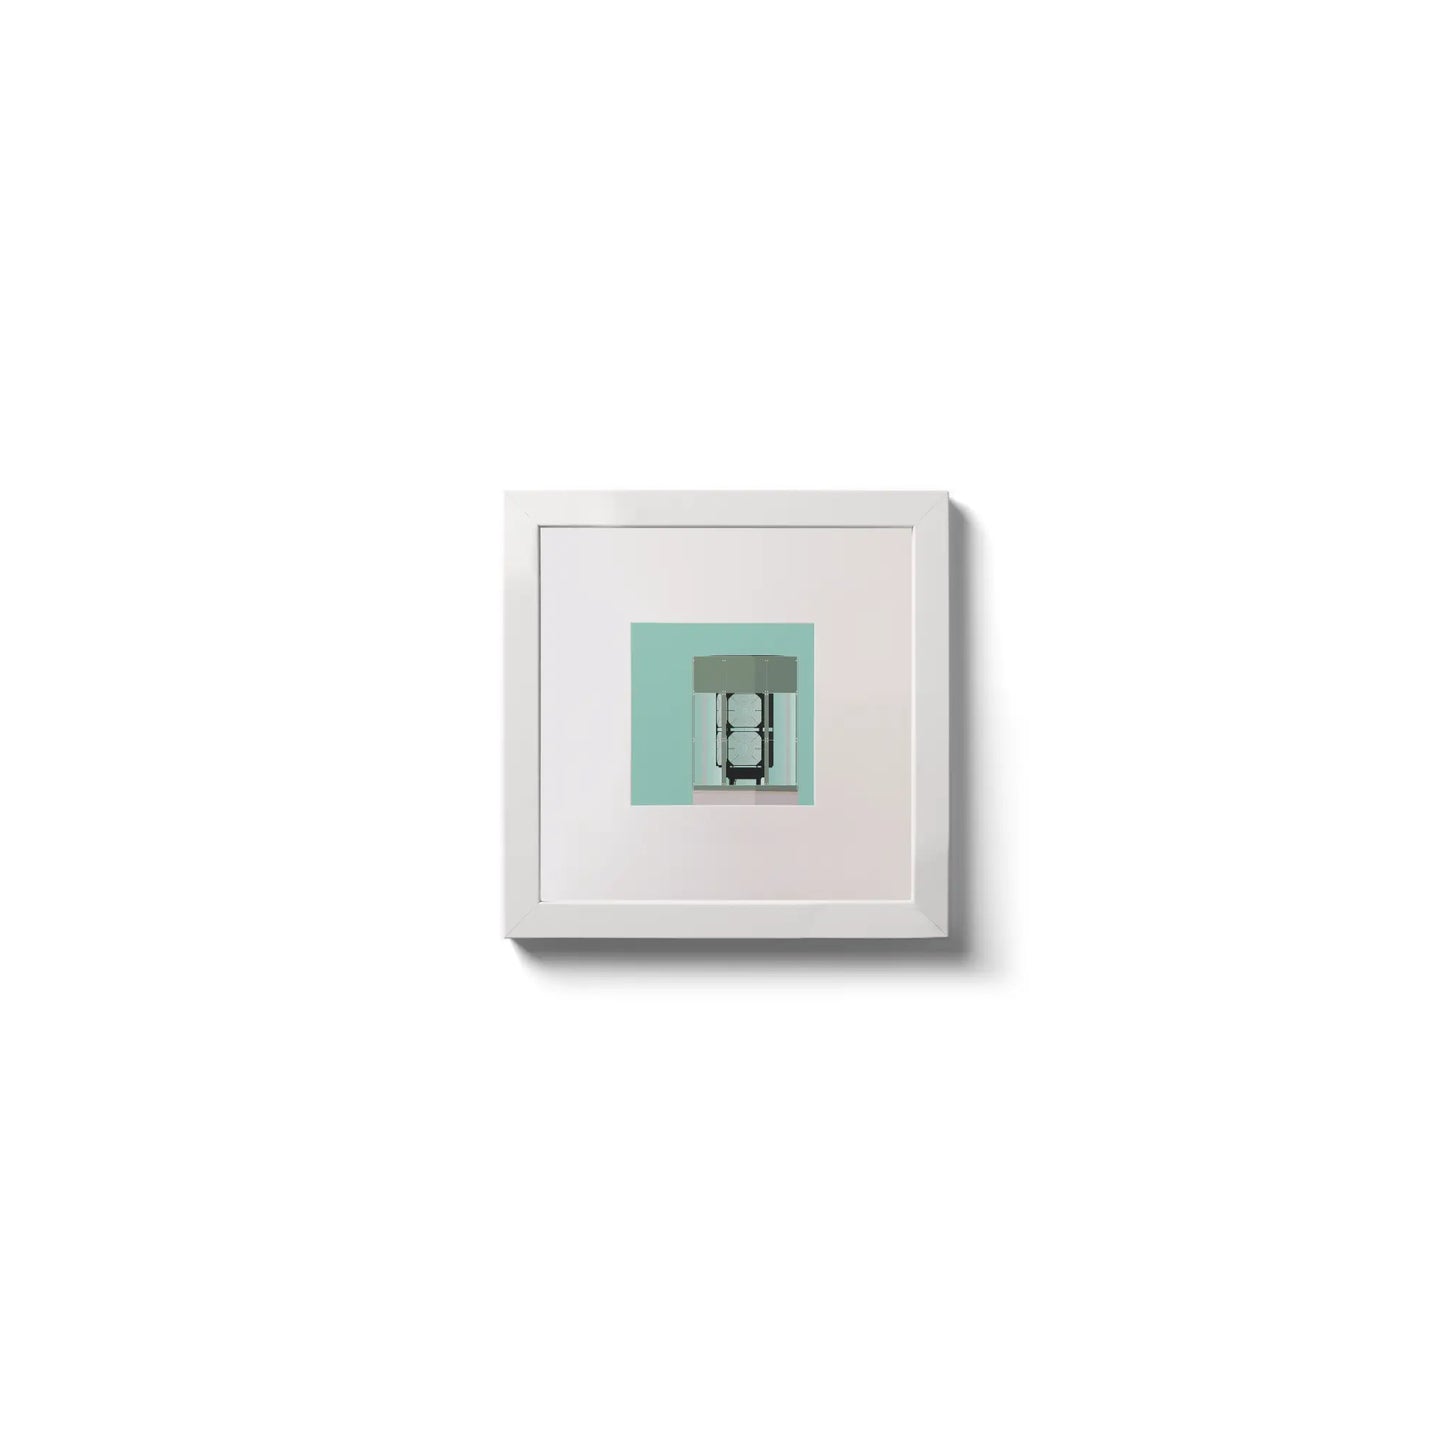 Illustration  The Great Light lighthouse on an ocean green background,  in a white square frame measuring 10x10cm.